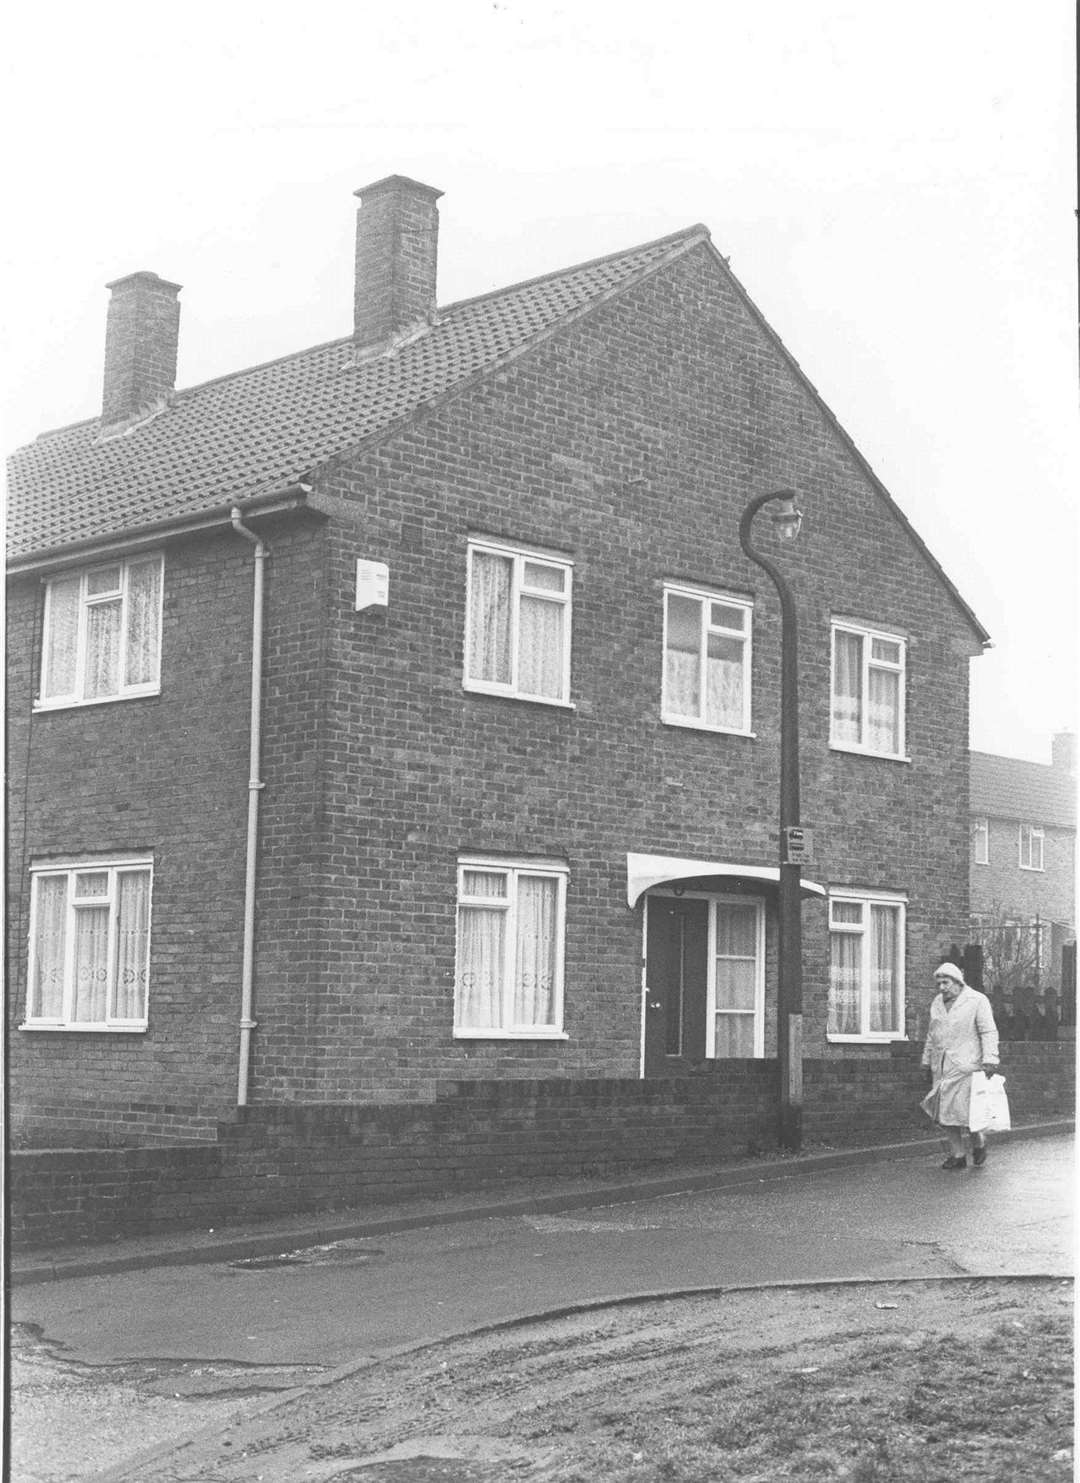 Mike Whitehead's old home in 74 Goudhurst Road, Twydall, Gillingham, where the Manish Boys sometimes rehearsed